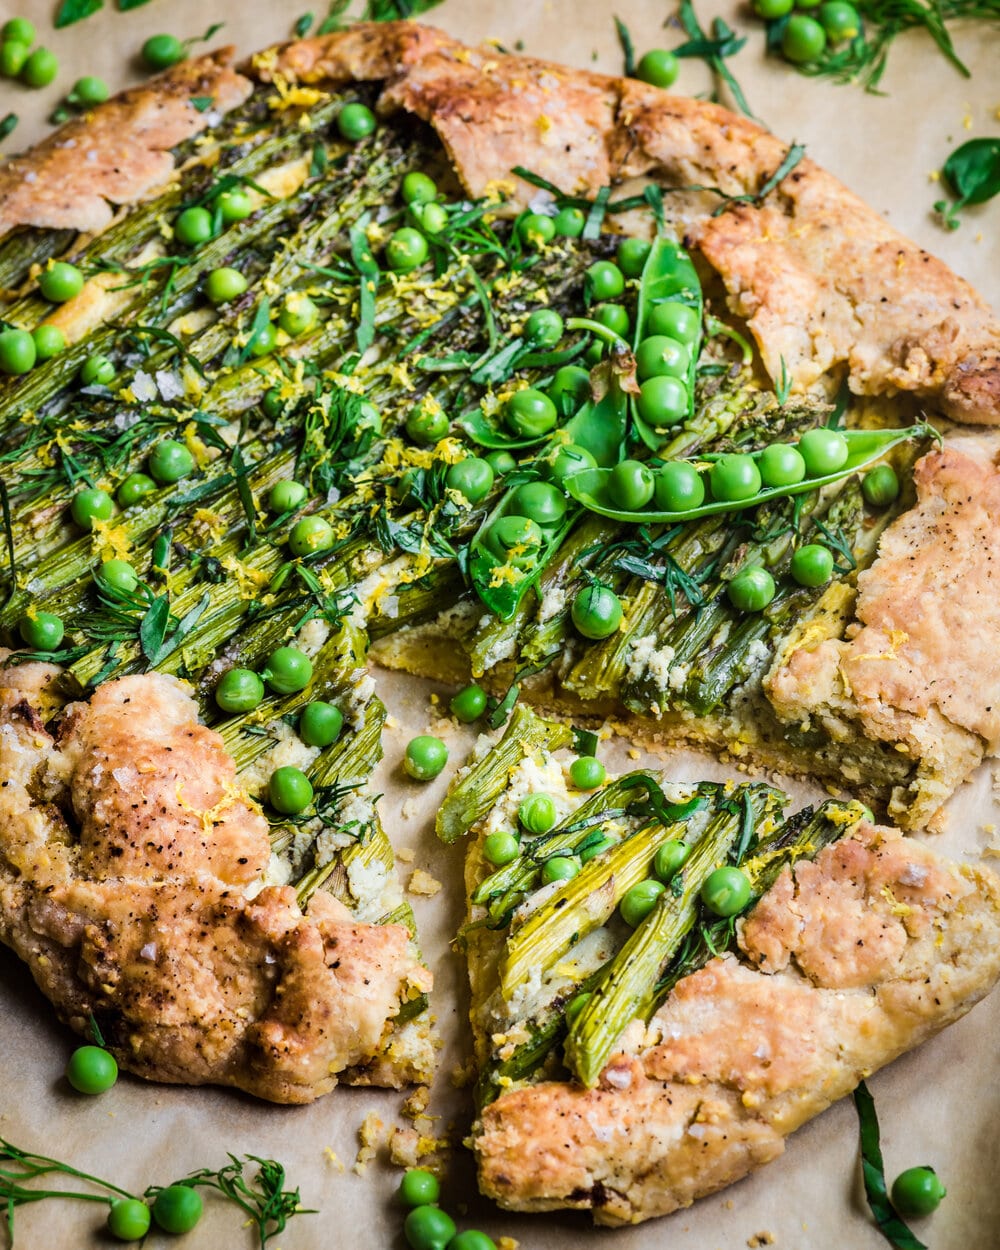 Baked galette with fresh peas with one slice cut from it.